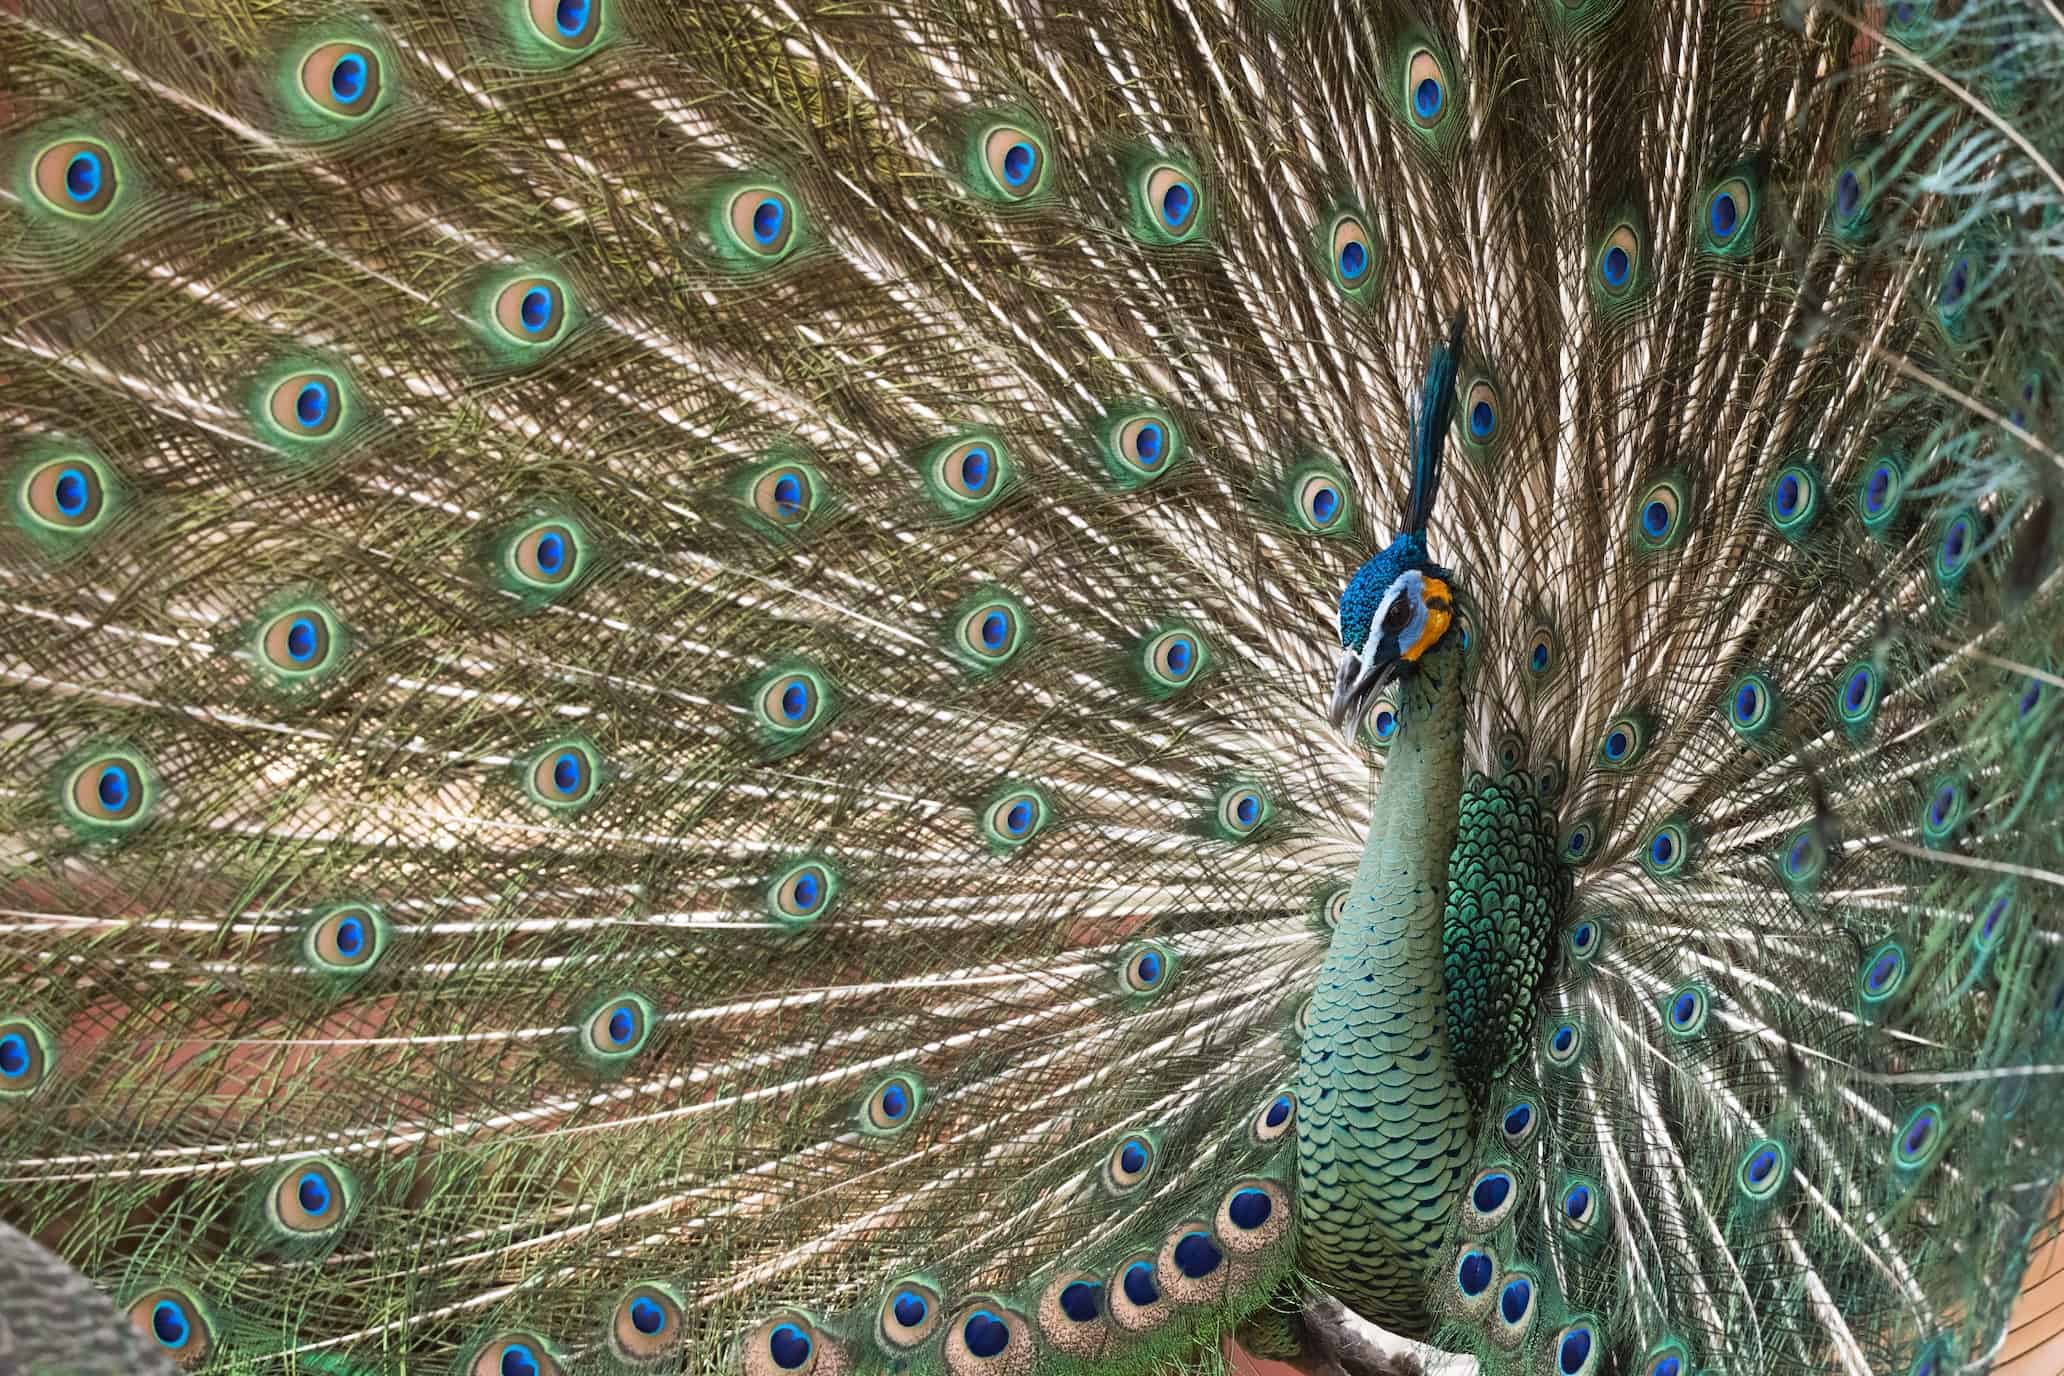 Green peafowl flourish in Thailand’s northern forests, but conflict looms